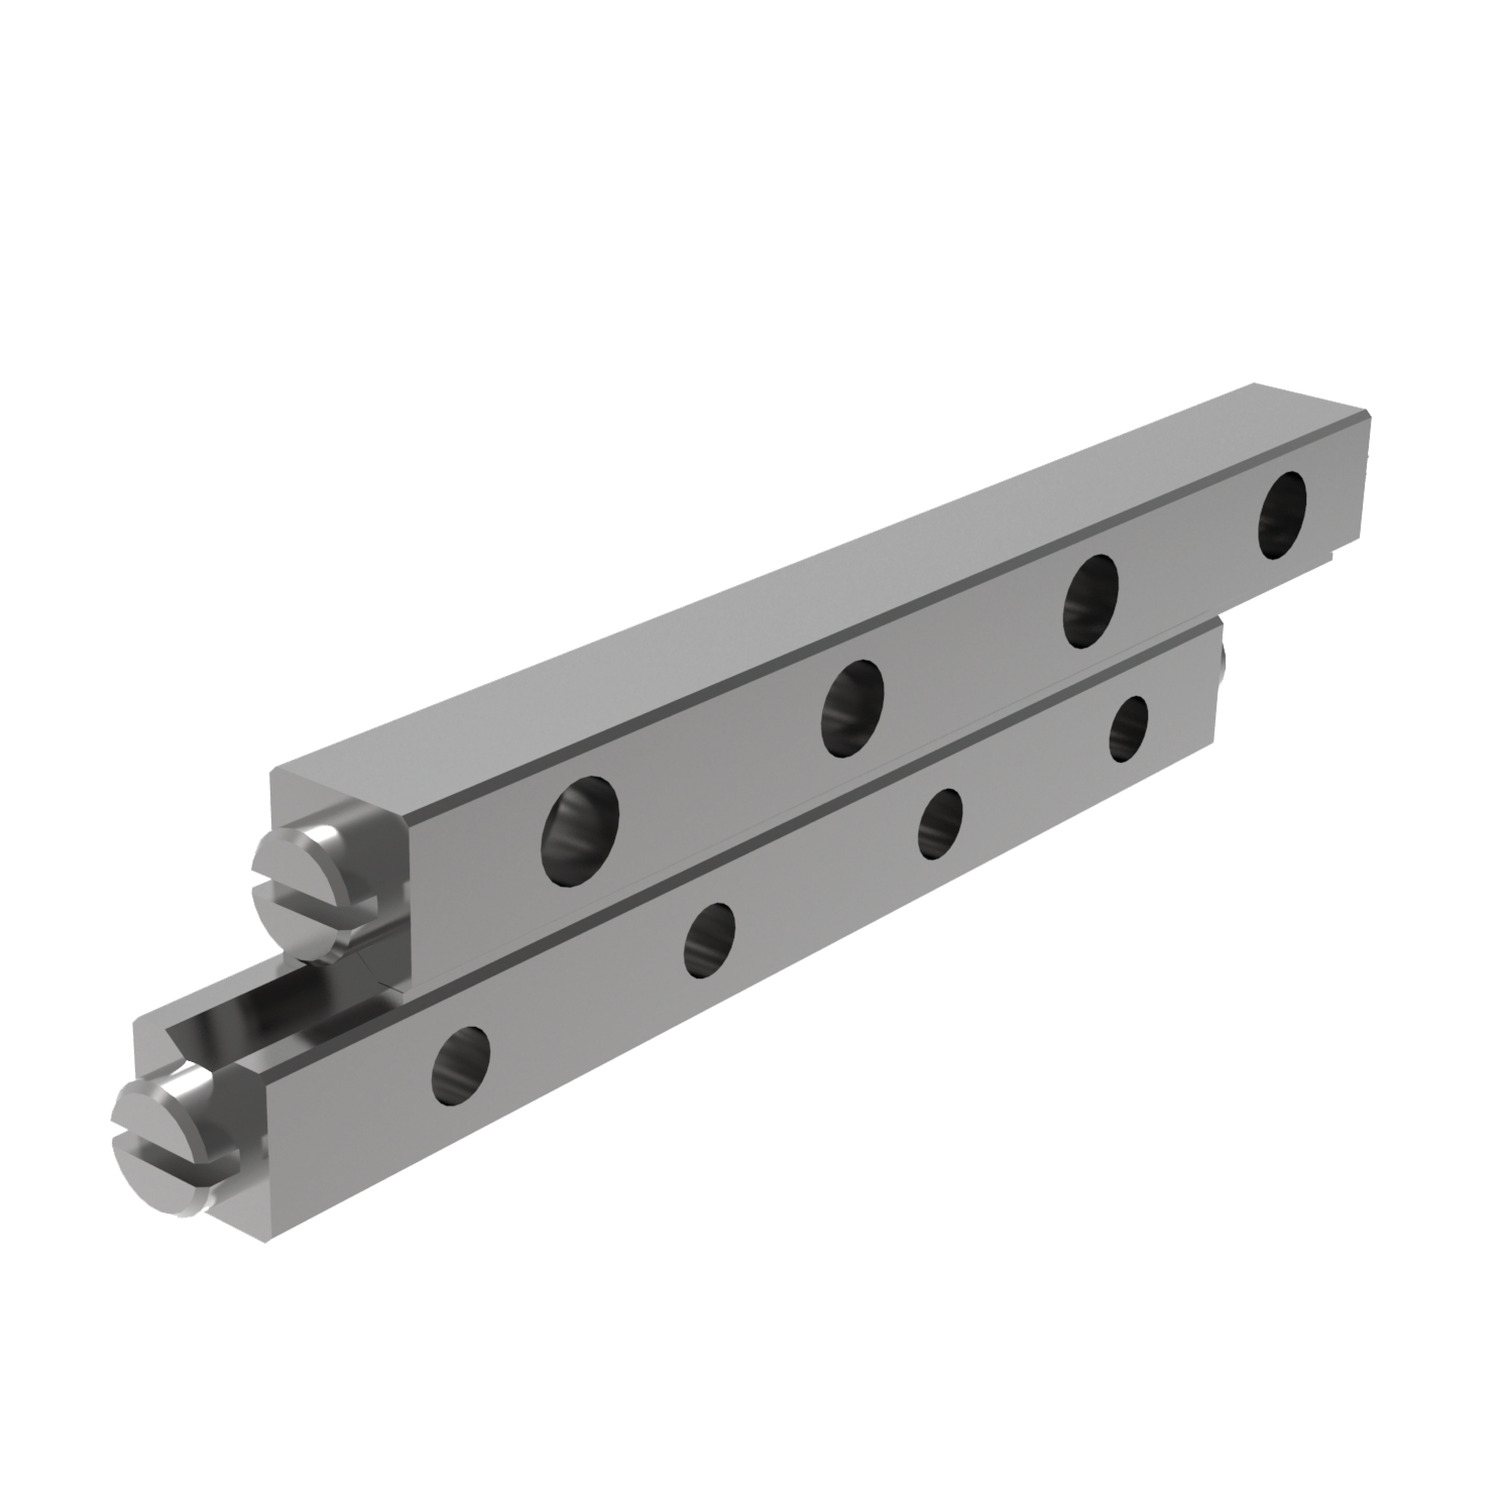 Stainless Crossed Roller Rail Sets This linear rail set has to withstand very heavy loads. Therefore it is made from the extremely strong 440C series stainless steel, hardened to HRc 60±2. Nickel plated for extra resistance to corrosion. See more crossed roller rail sets here.